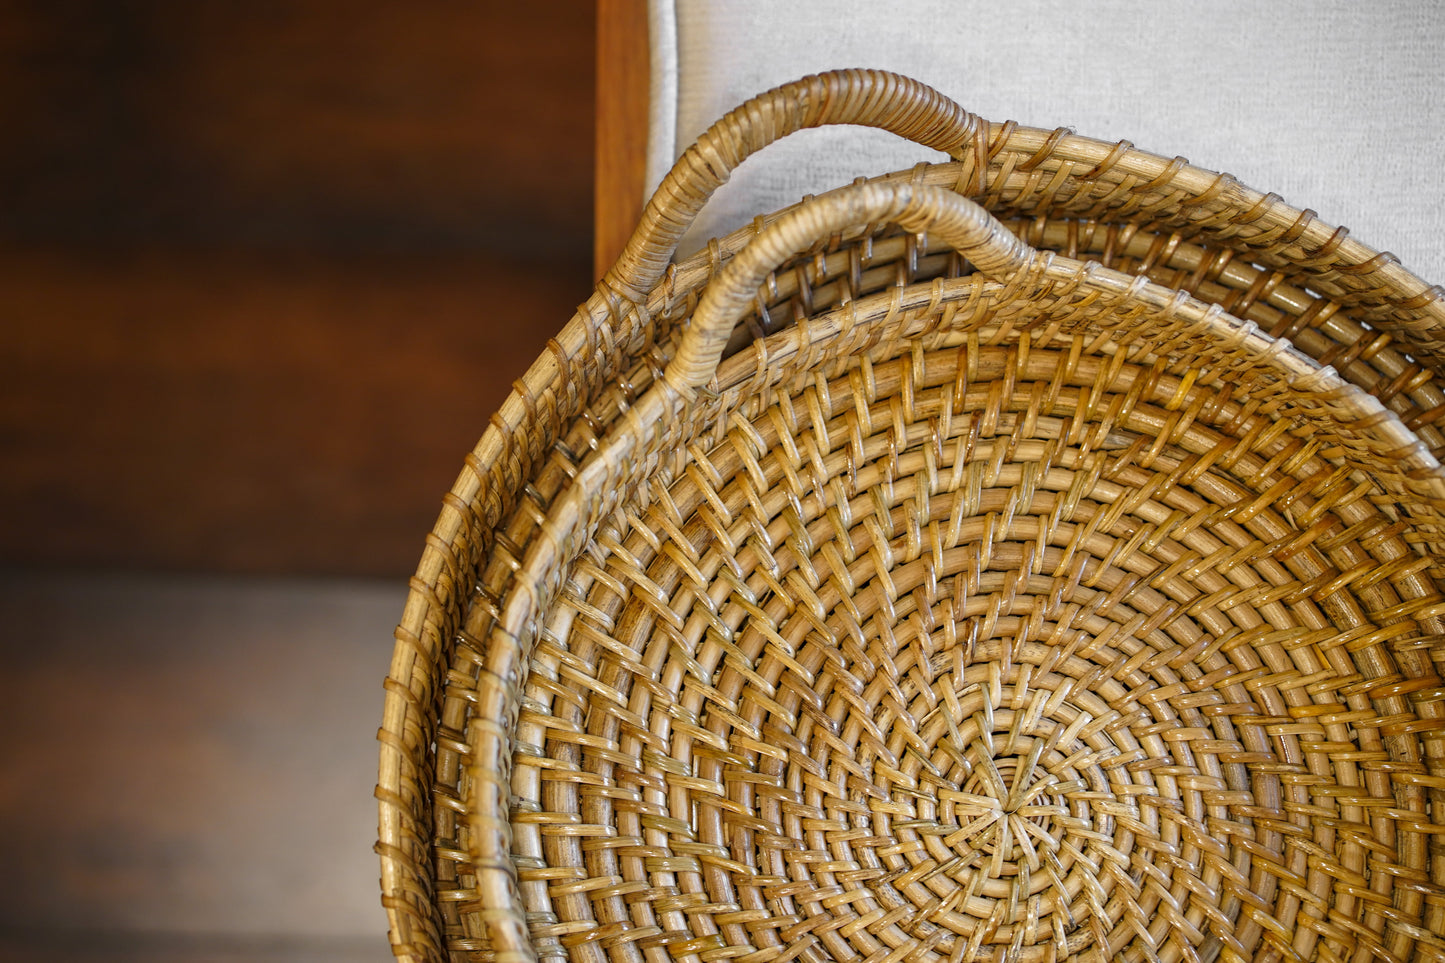 Handwoven Cane Serving tray with handle